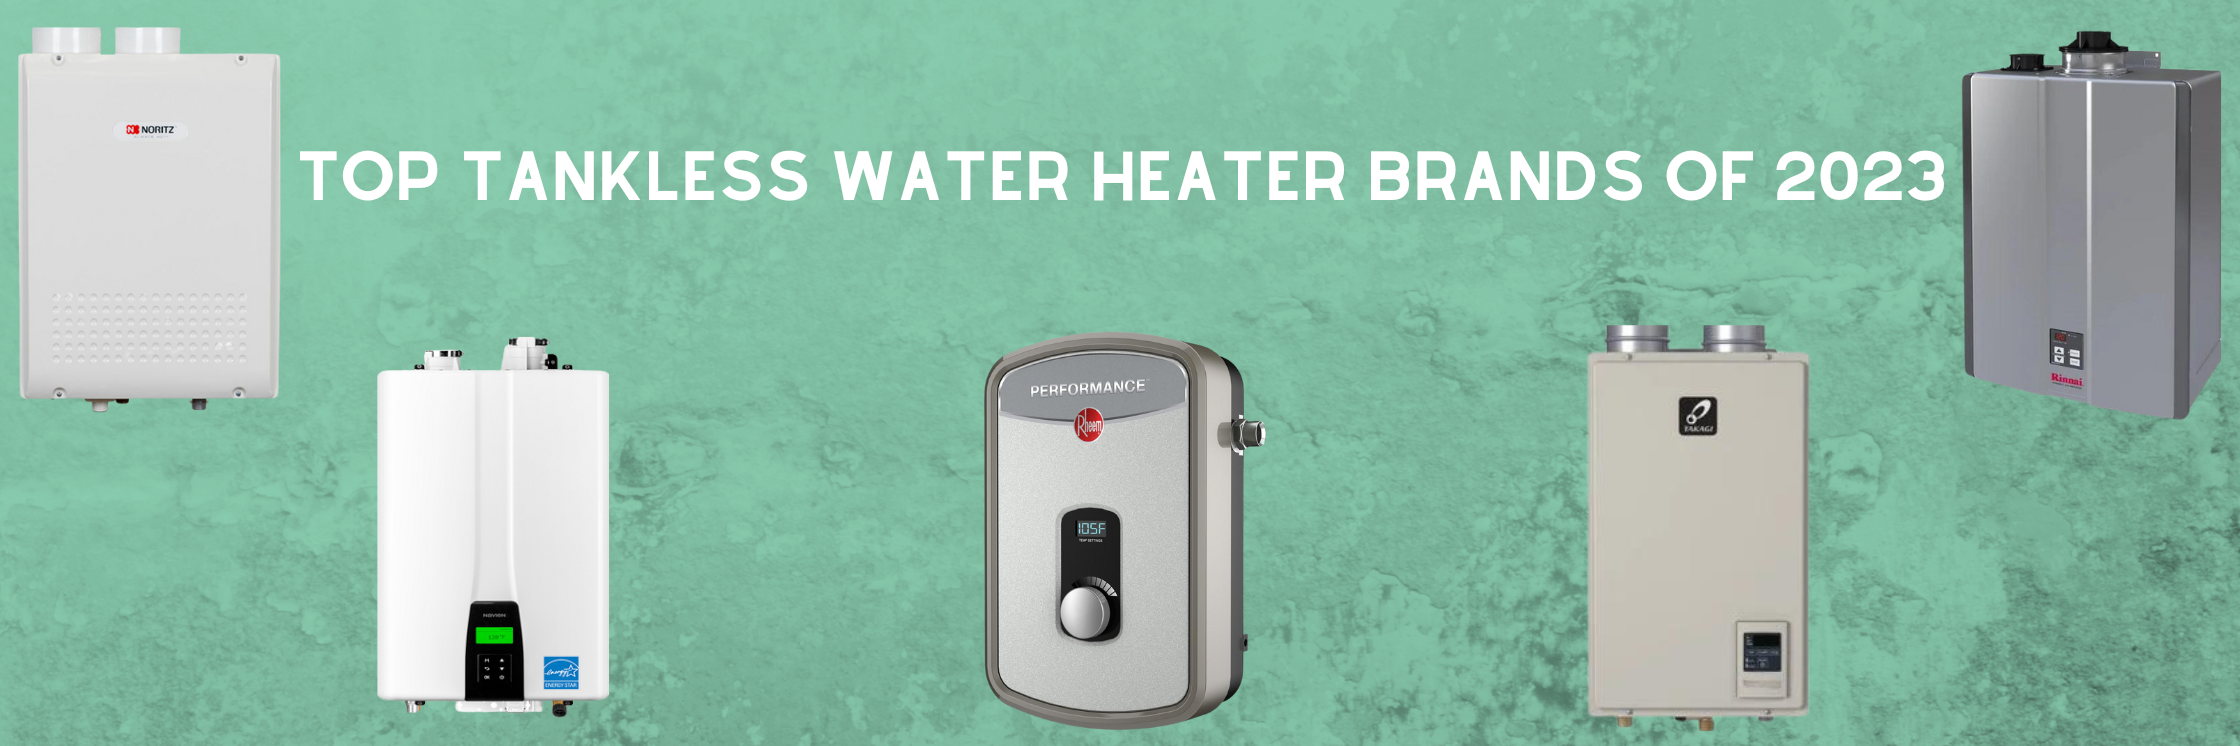 Top Tankless Water Heater Brands of 2023